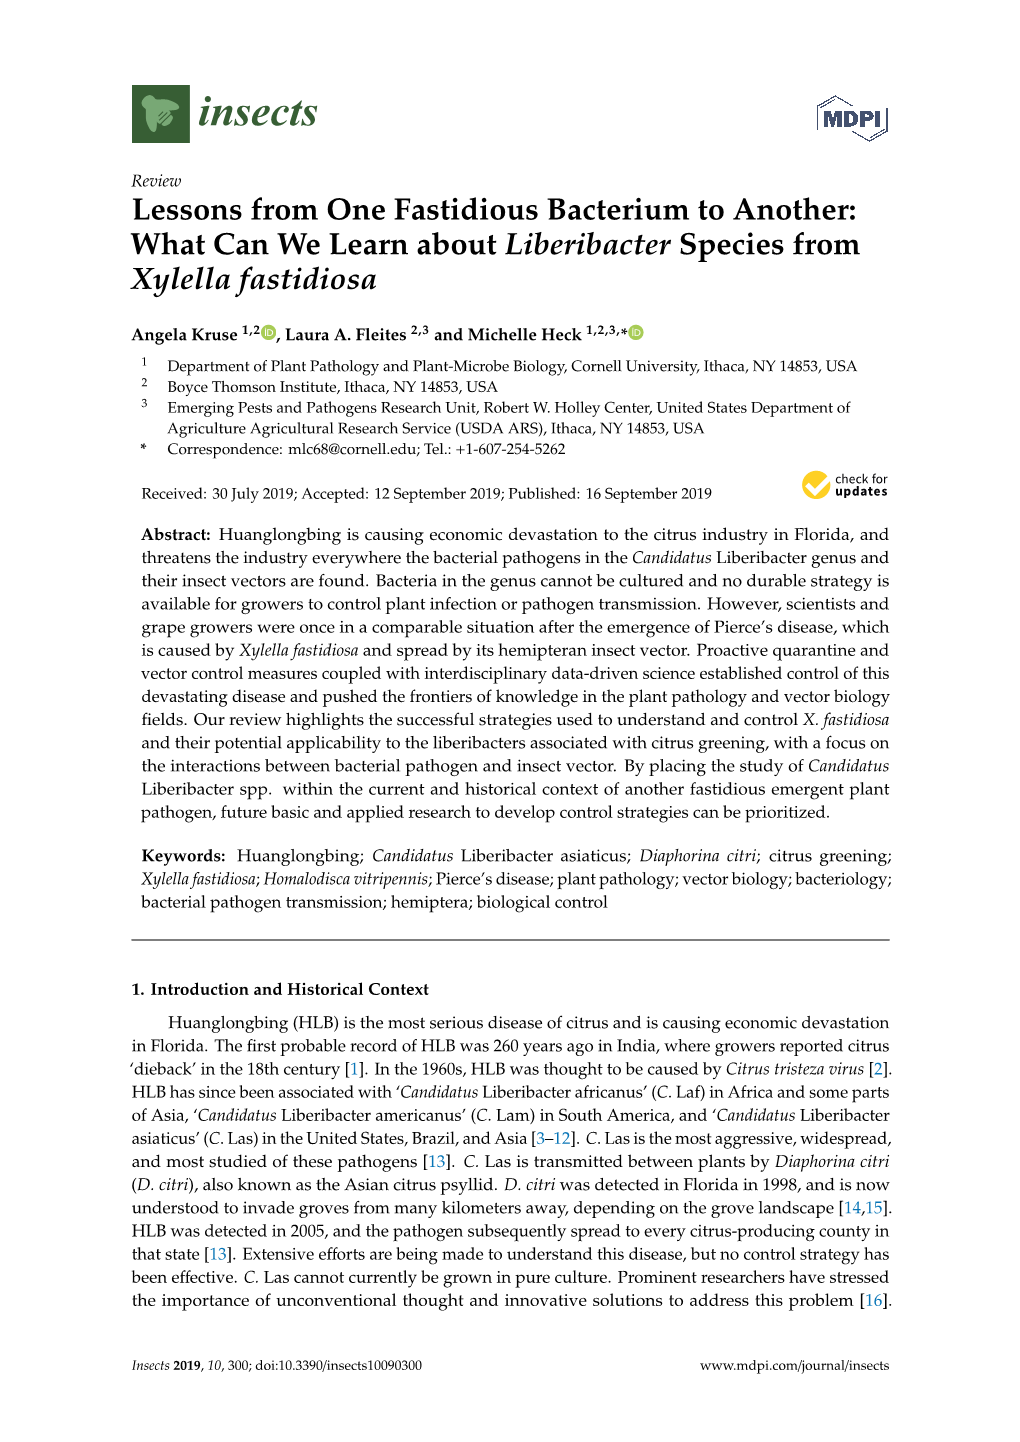 Lessons from One Fastidious Bacterium to Another: What Can We Learn About Liberibacter Species from Xylella Fastidiosa